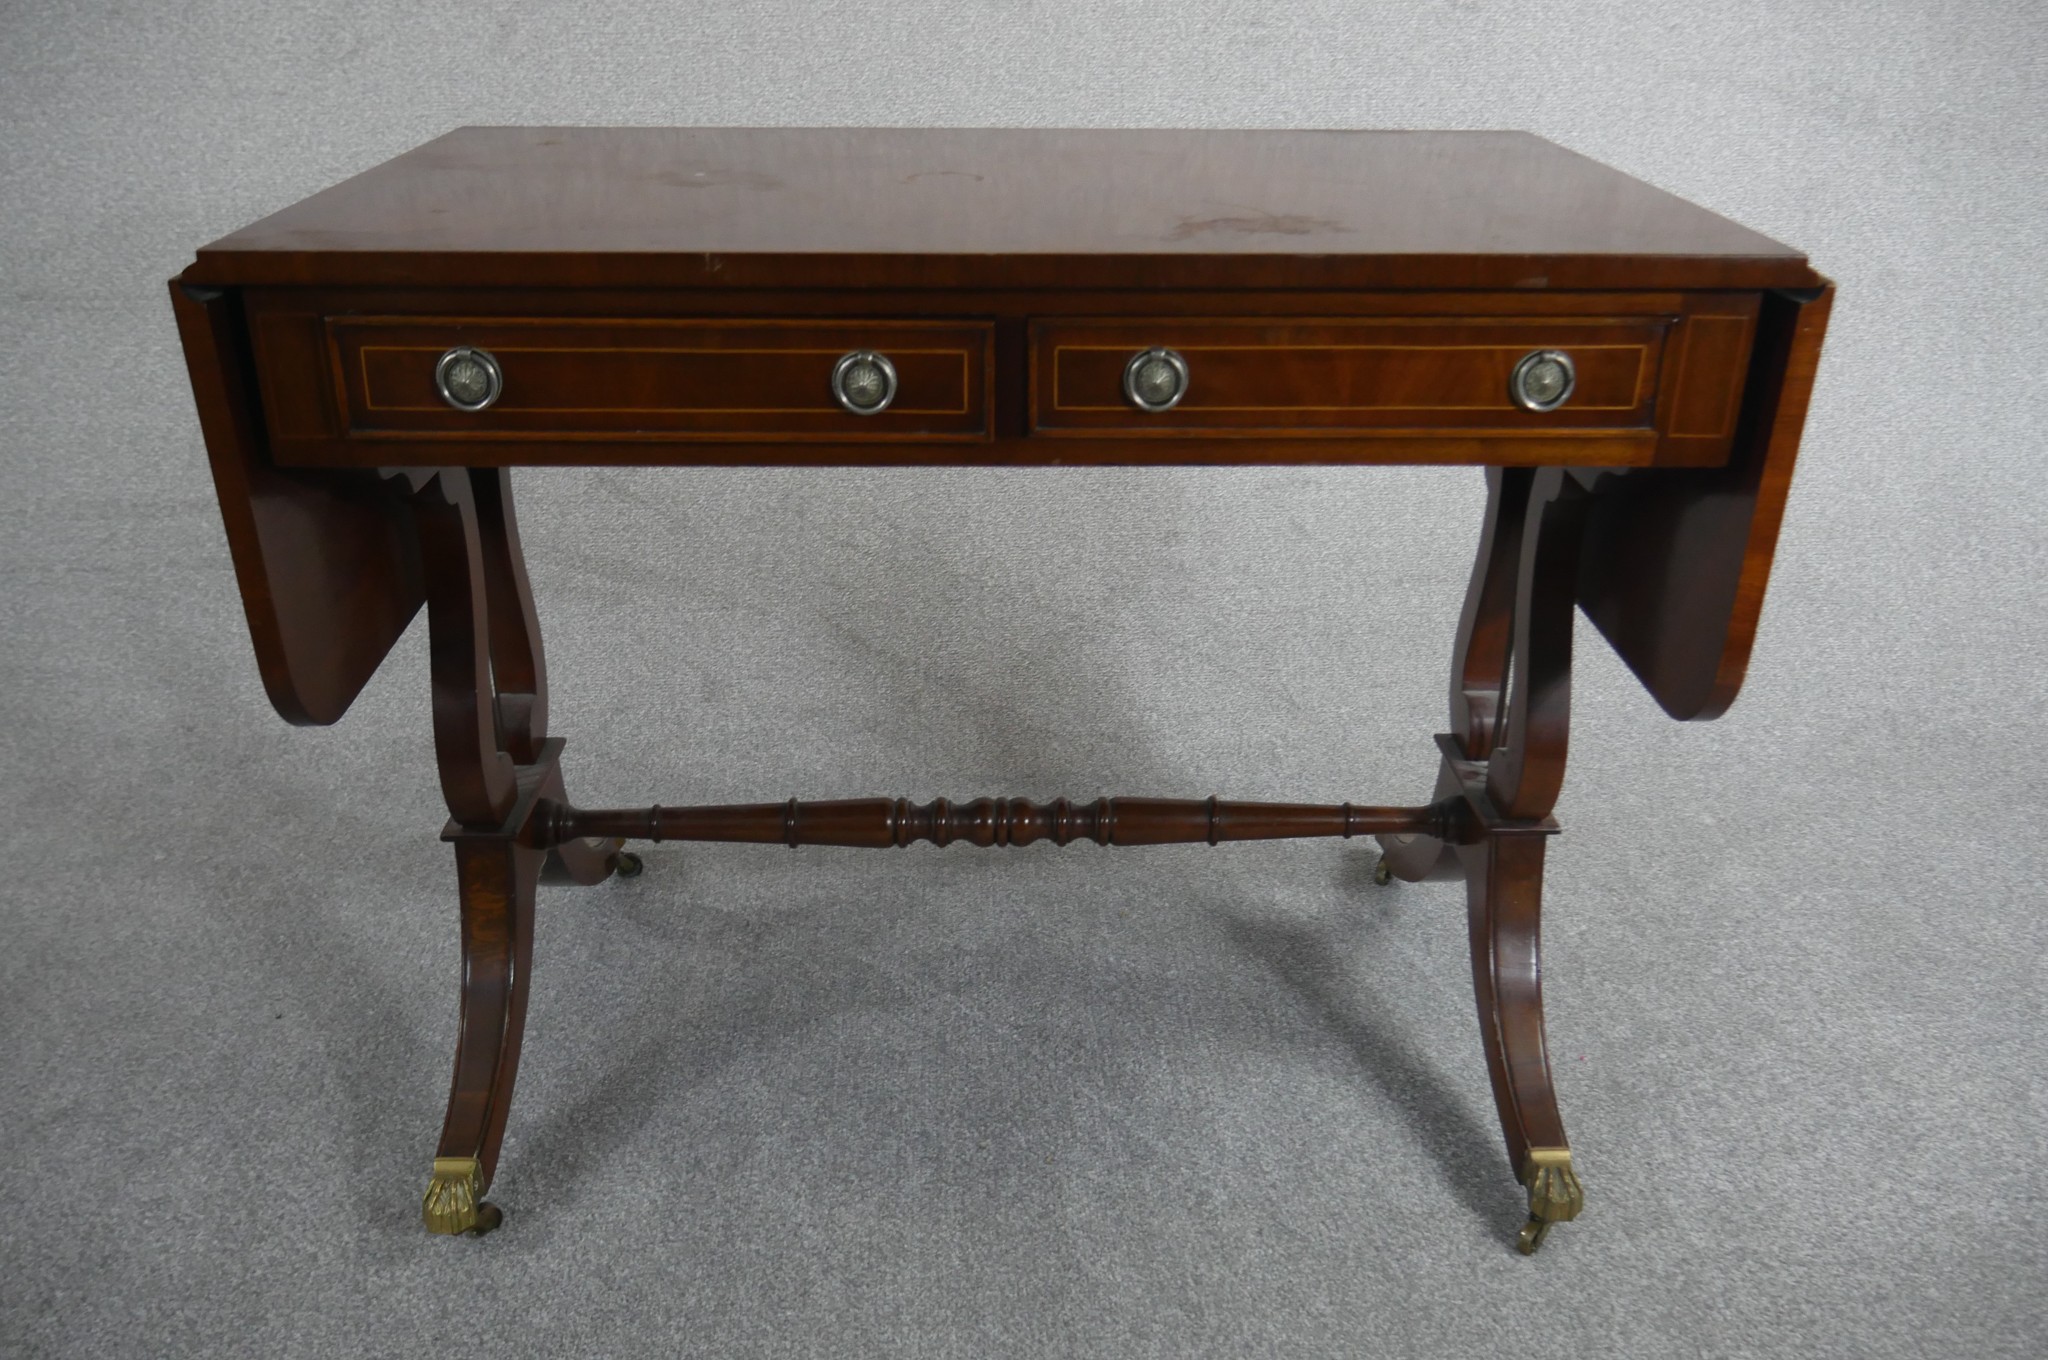 A George III style reproduction mahogany sofa table, with two drop leaves and two short drawers on